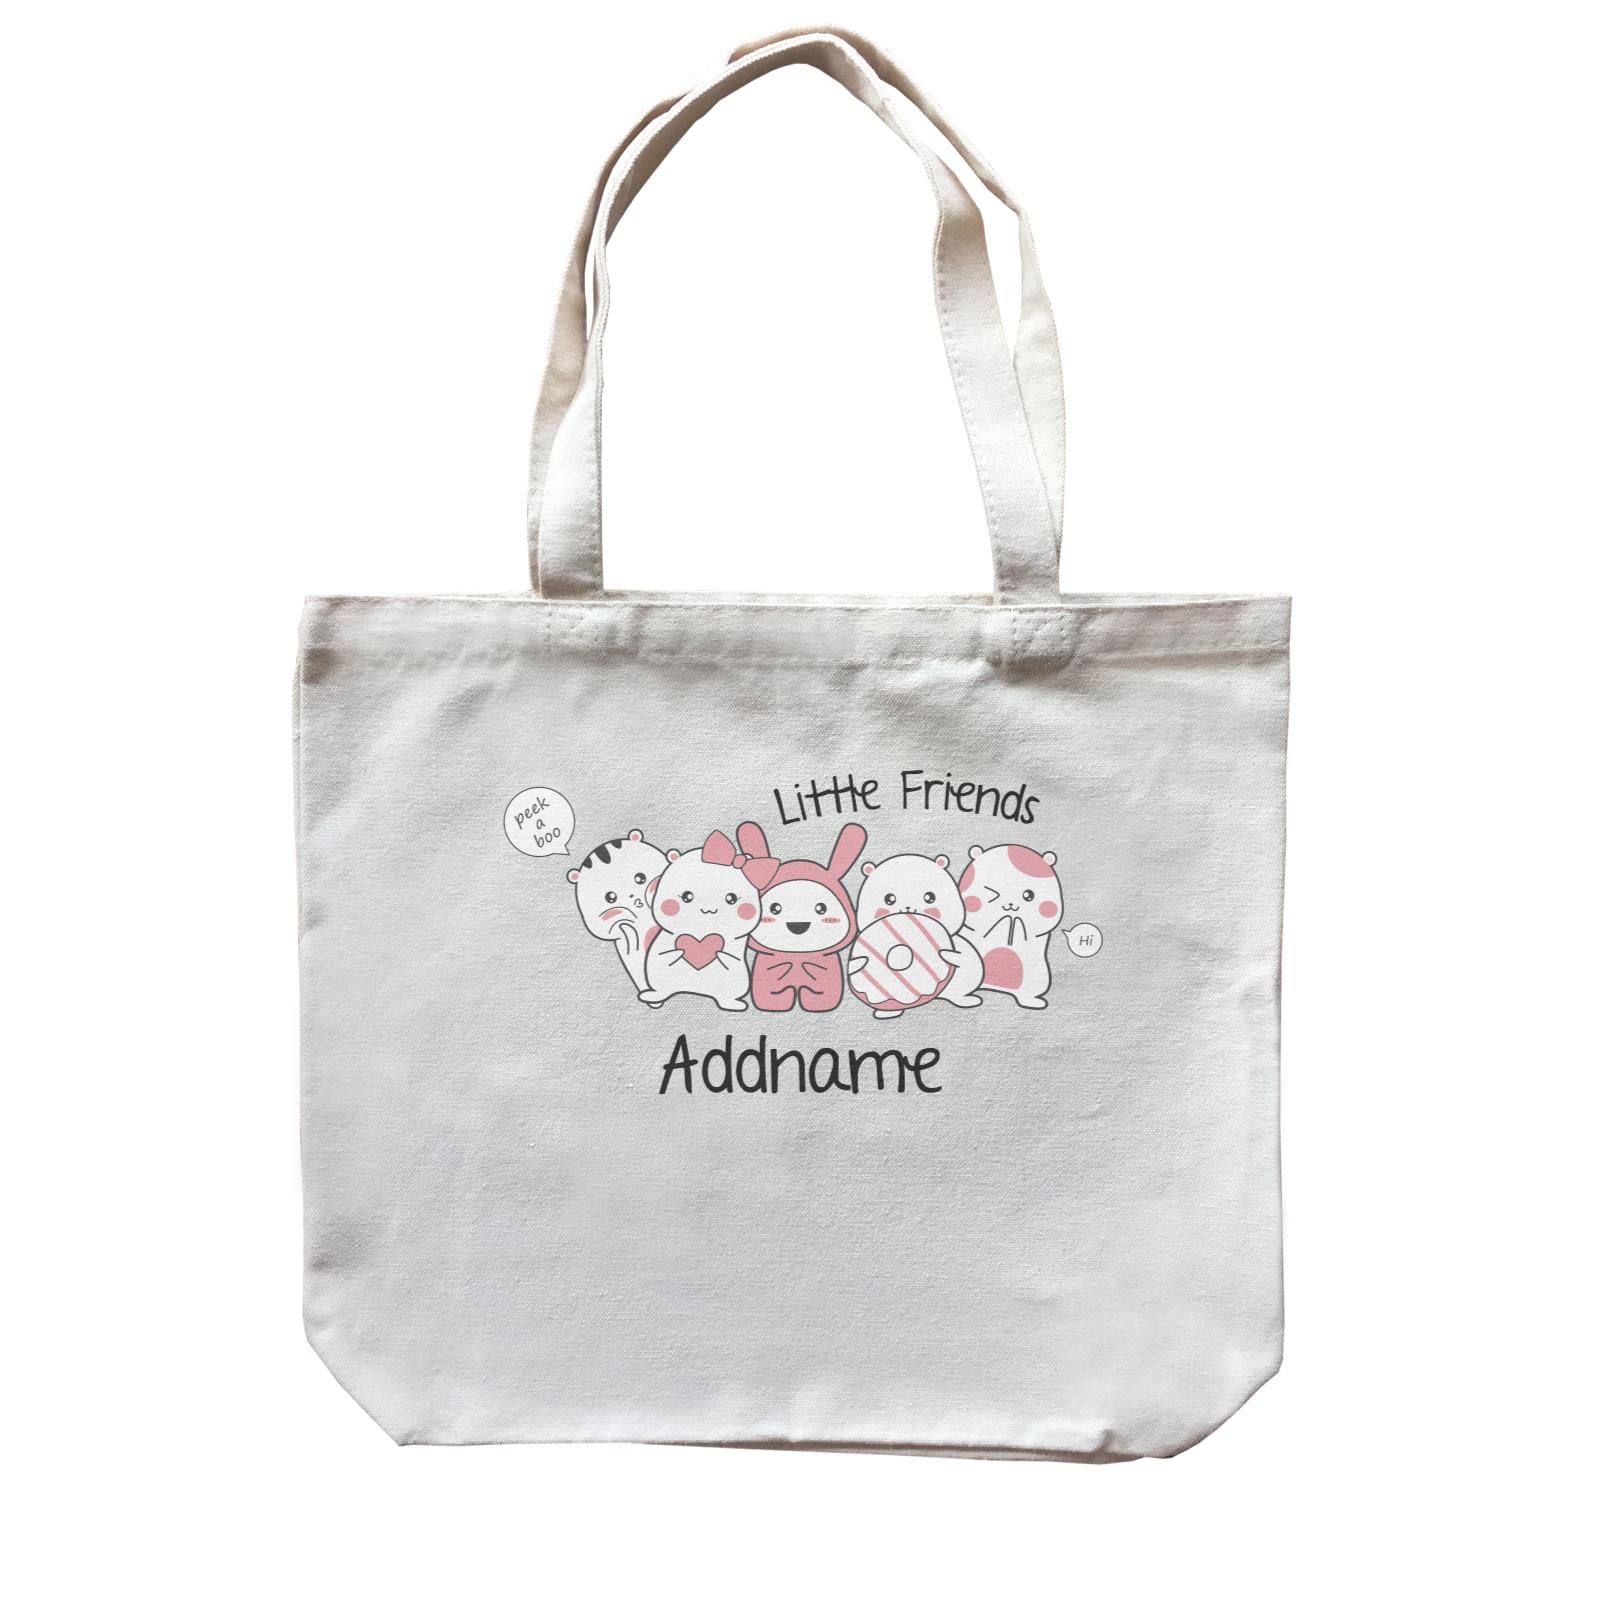 Cute Animals And Friends Series Cute Hamster Little Friends Addname Canvas Bag